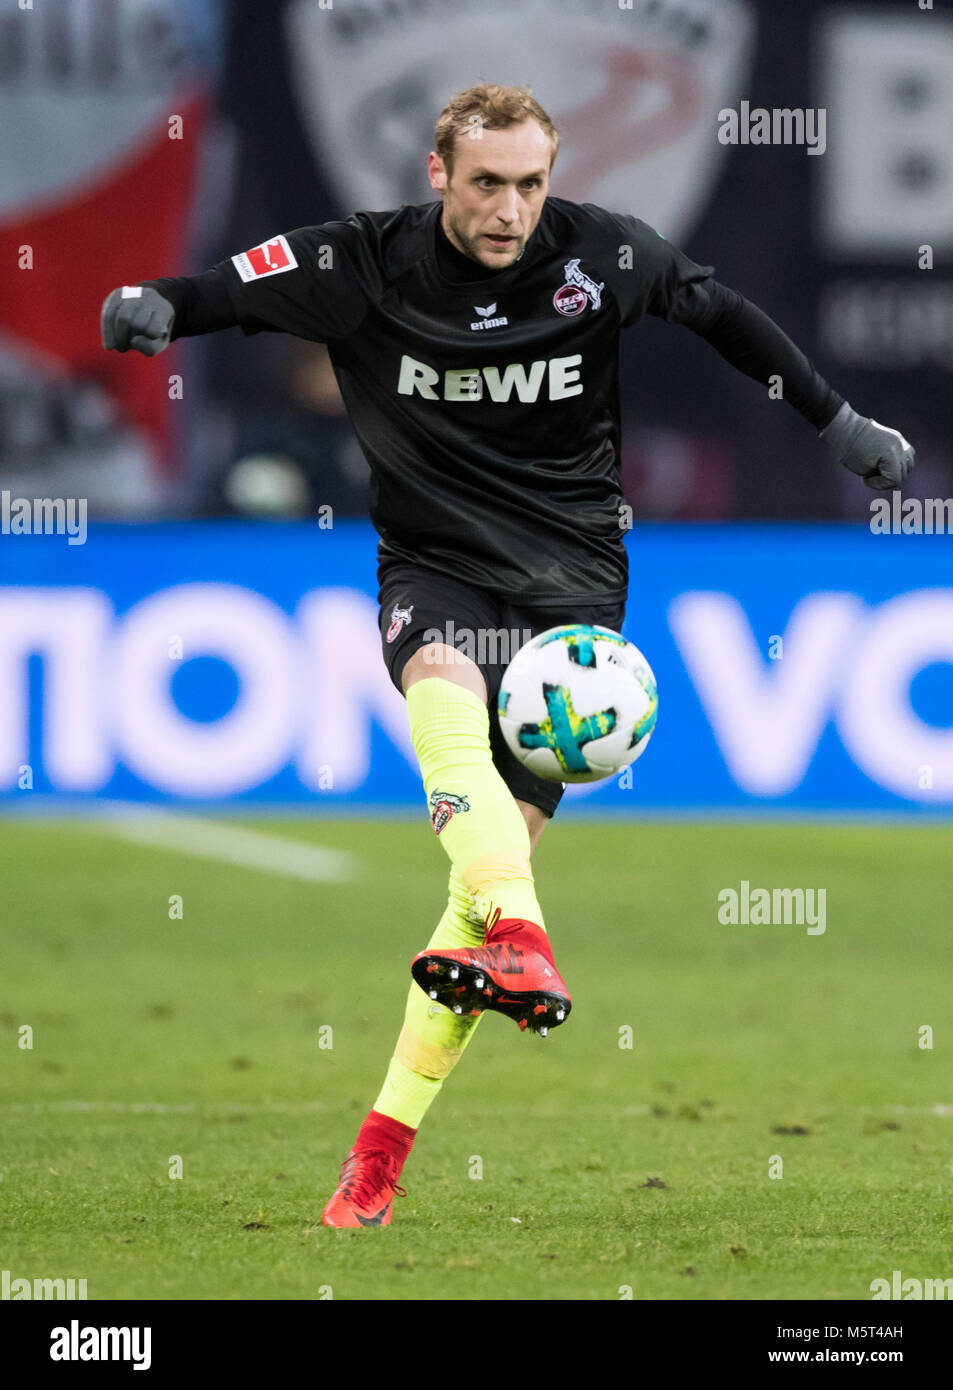 25 Febuary 2018, Germany, Leipzig: German Bundesliga soccer match between RB Leipzig and 1. FC Cologne, Red Bull Arena: Cologne's Marcel Risse in action. Photo: Soeren Stache/dpa - Nutzung nur nach vertraglicher Vereinbarung Stock Photo